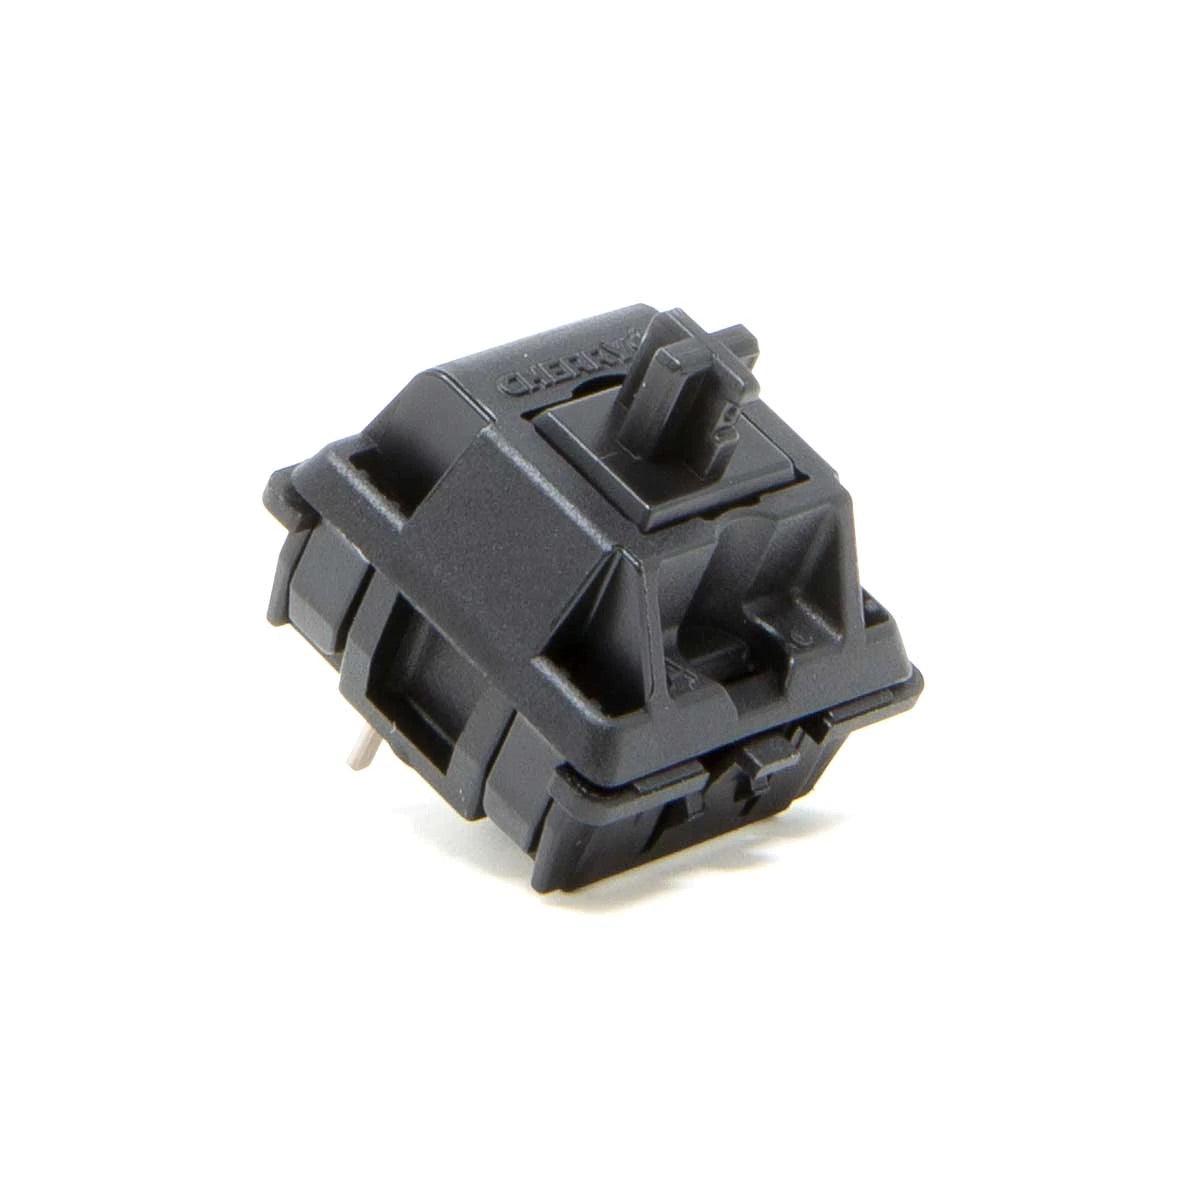 Cherry Hyperglide MX Switches - Ascend Keyboards